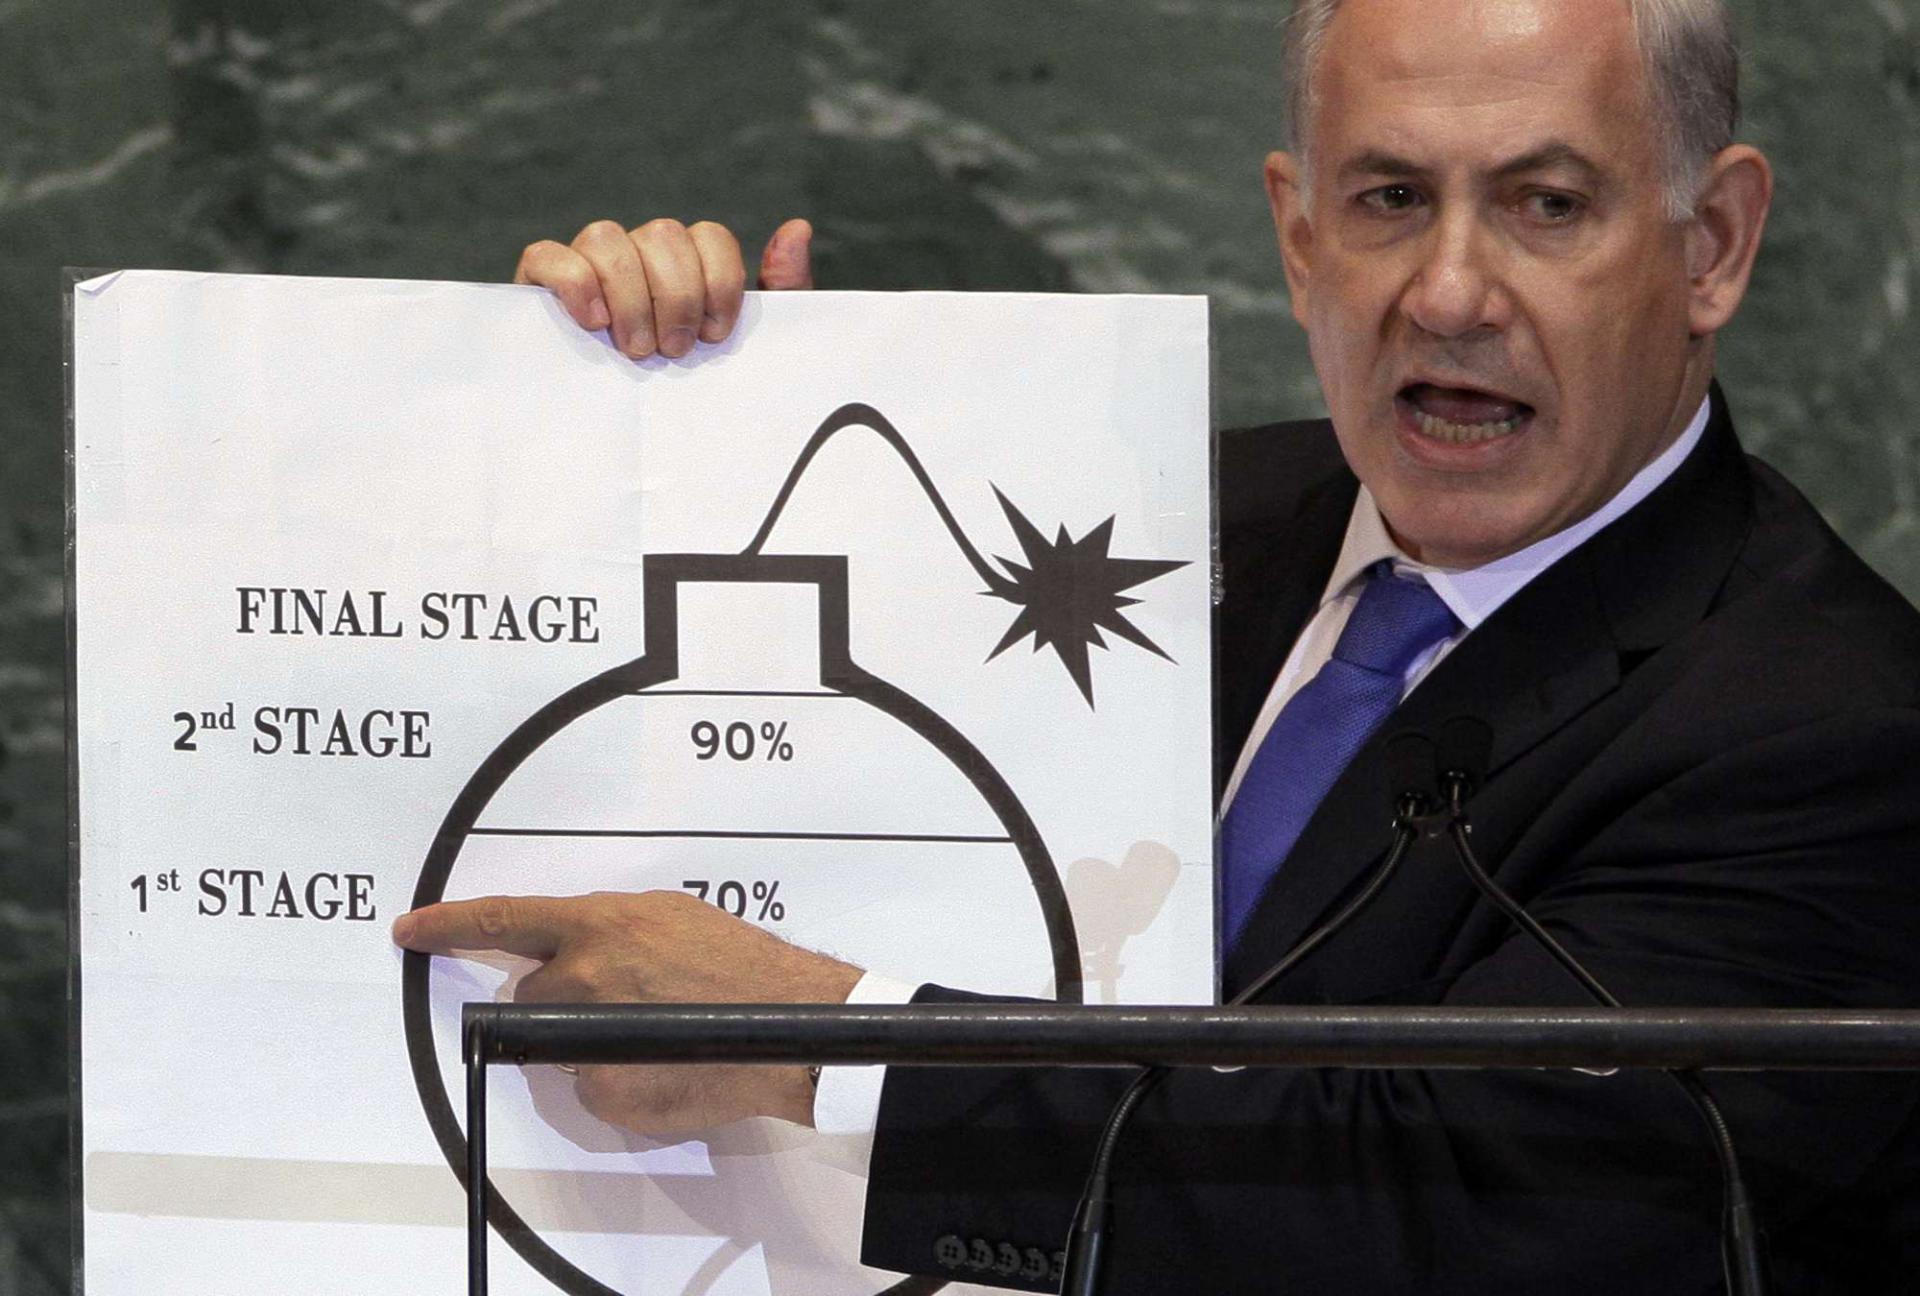 Israel fiercely opposed the 2015 Iran nuclear deal